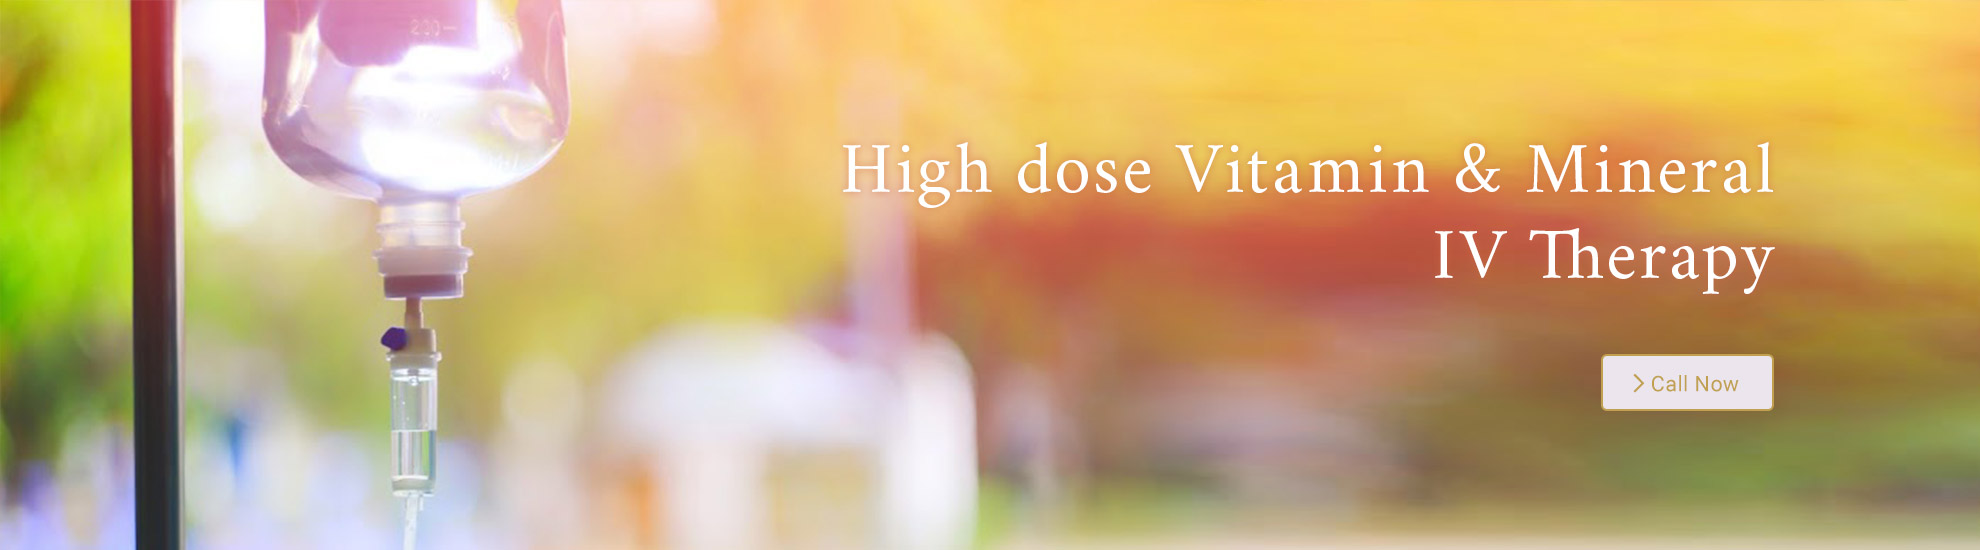 Picture of high dose Vitamin ＆ Mineral IV therapy